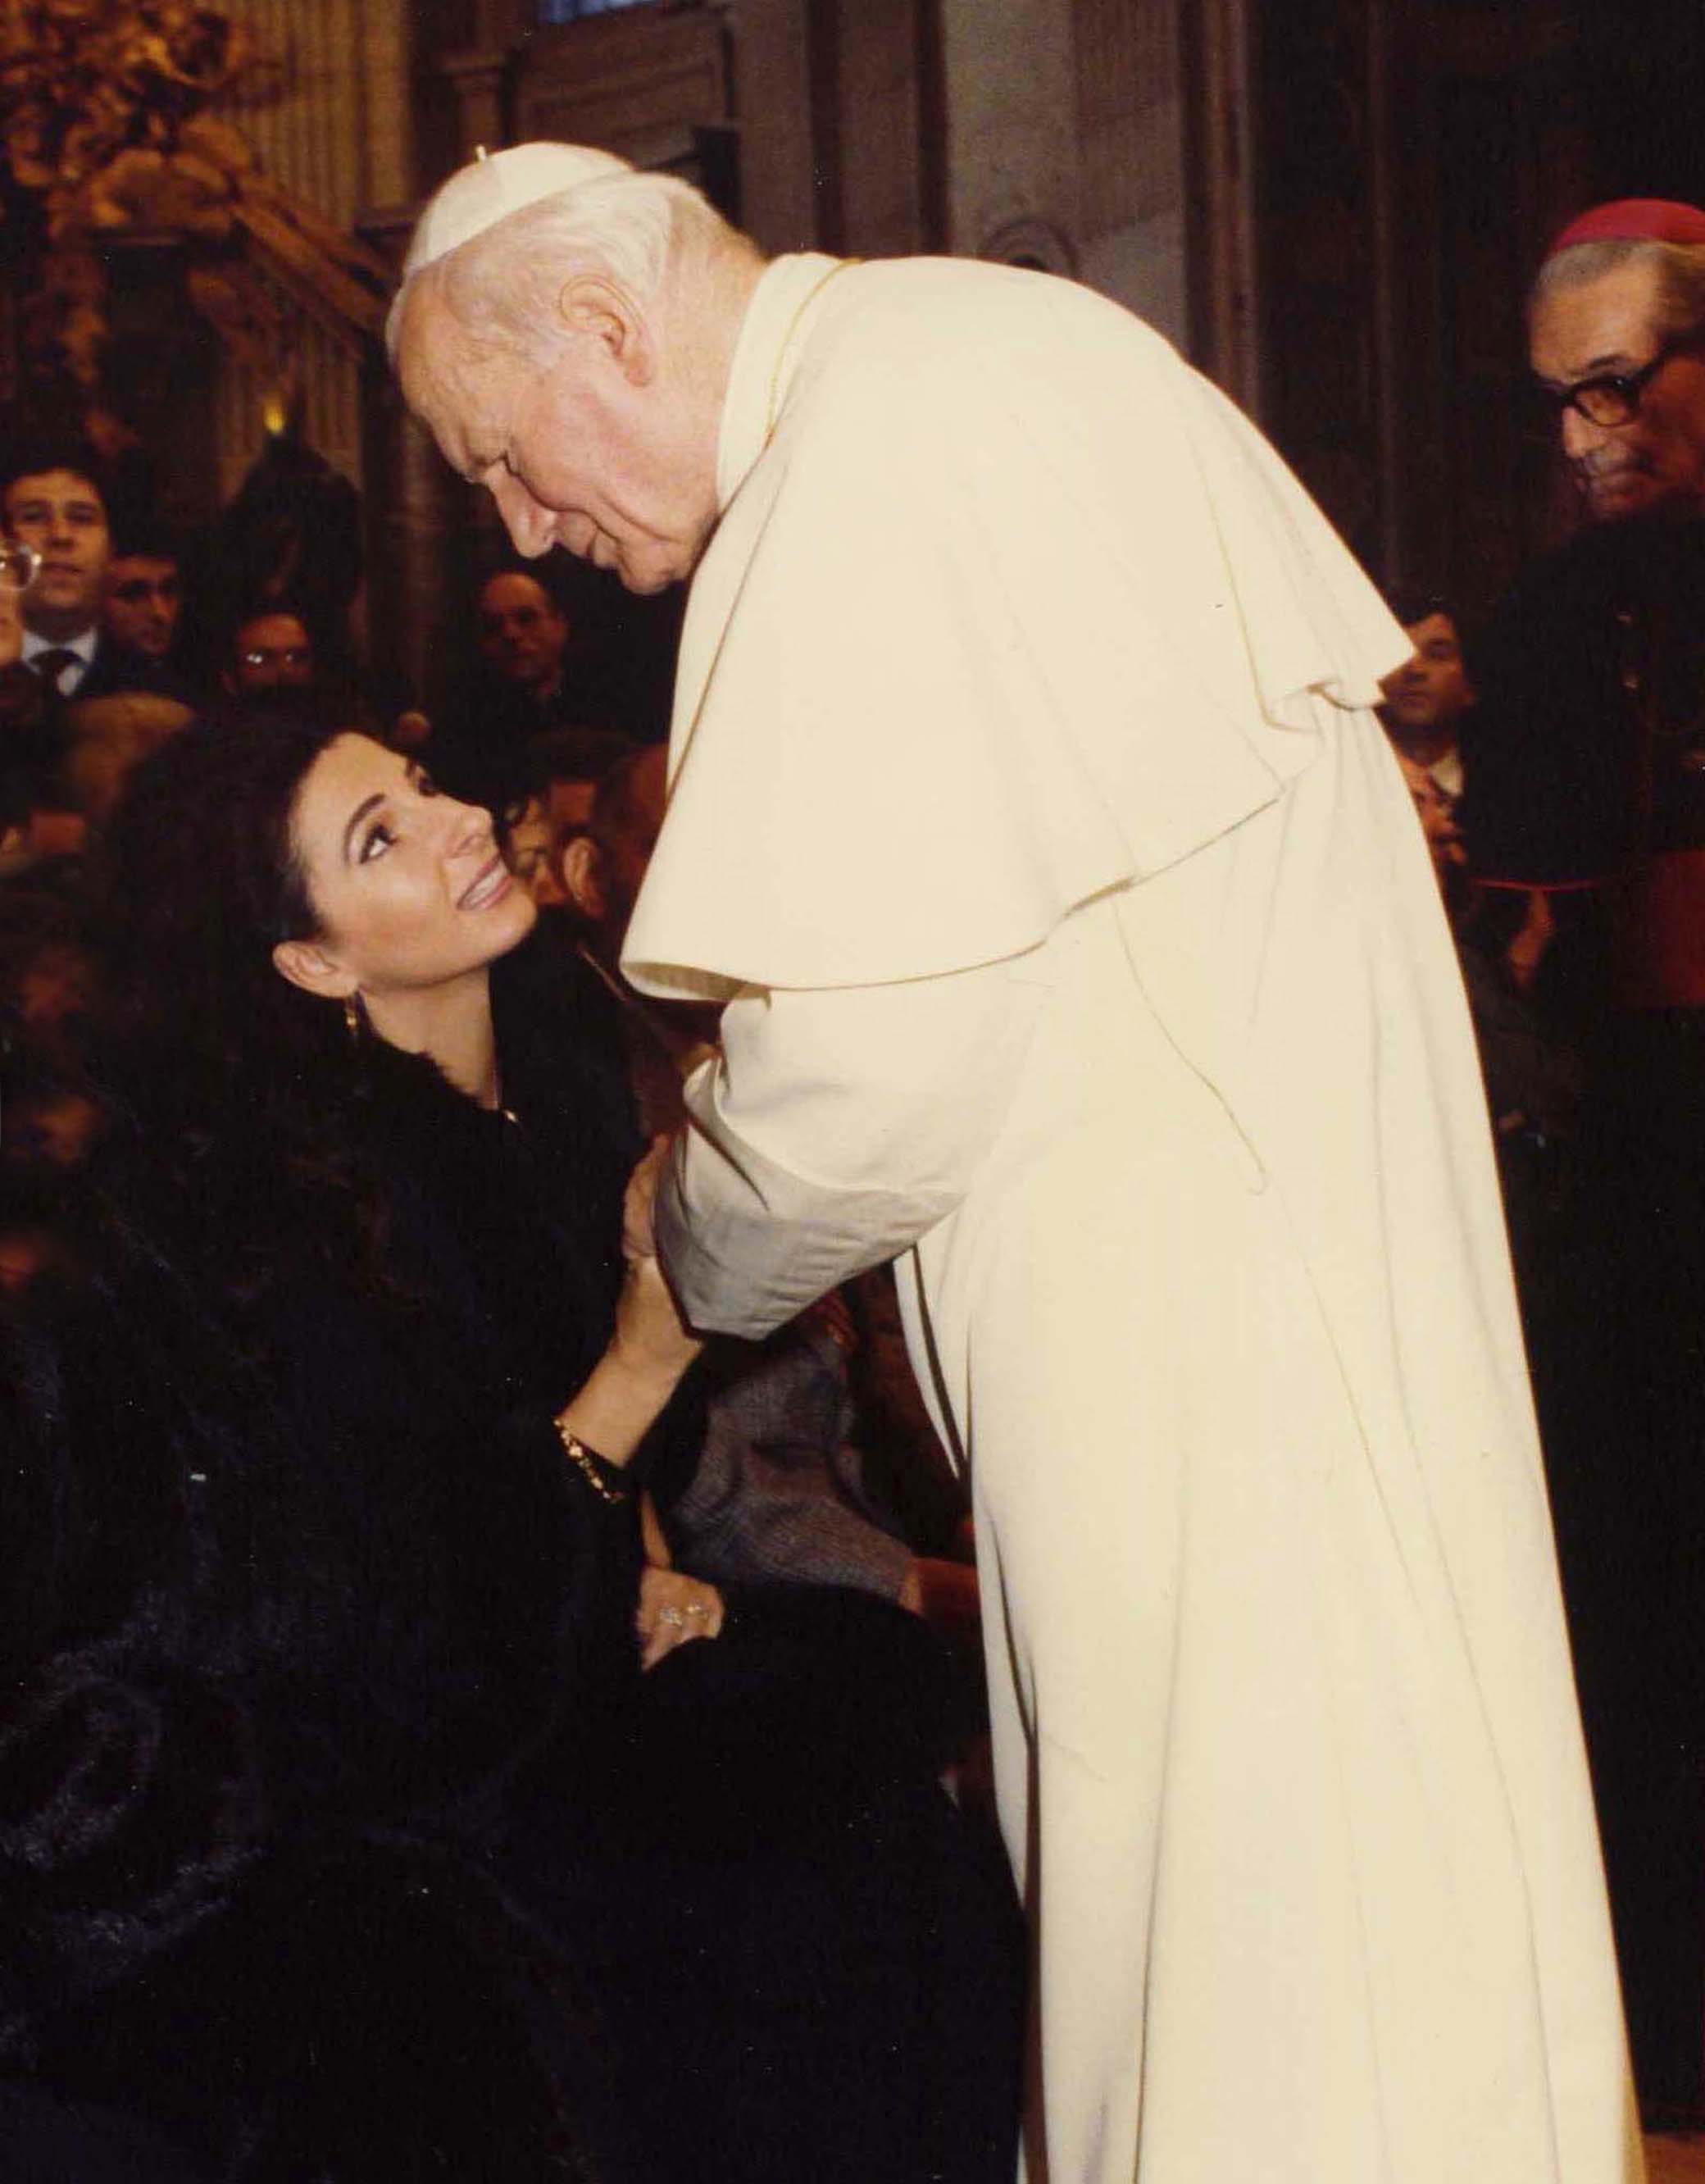 Lucia Aliberti with "Pope Karol Wojtyla”⚘Pope John Paul II⚘Concert⚘Vatican⚘III World International Meeting of the Families⚘Saint Peter's Square⚘Vatican⚘Rome⚘Private Audience⚘Photo taken from the Newspaper⚘:http://www.luciaaliberti.it #luciaaliberti #karolwojtyla #vatican #rome #IIIworldmeetingofthefamilies #concert #saintpeterssquare #privateaudience